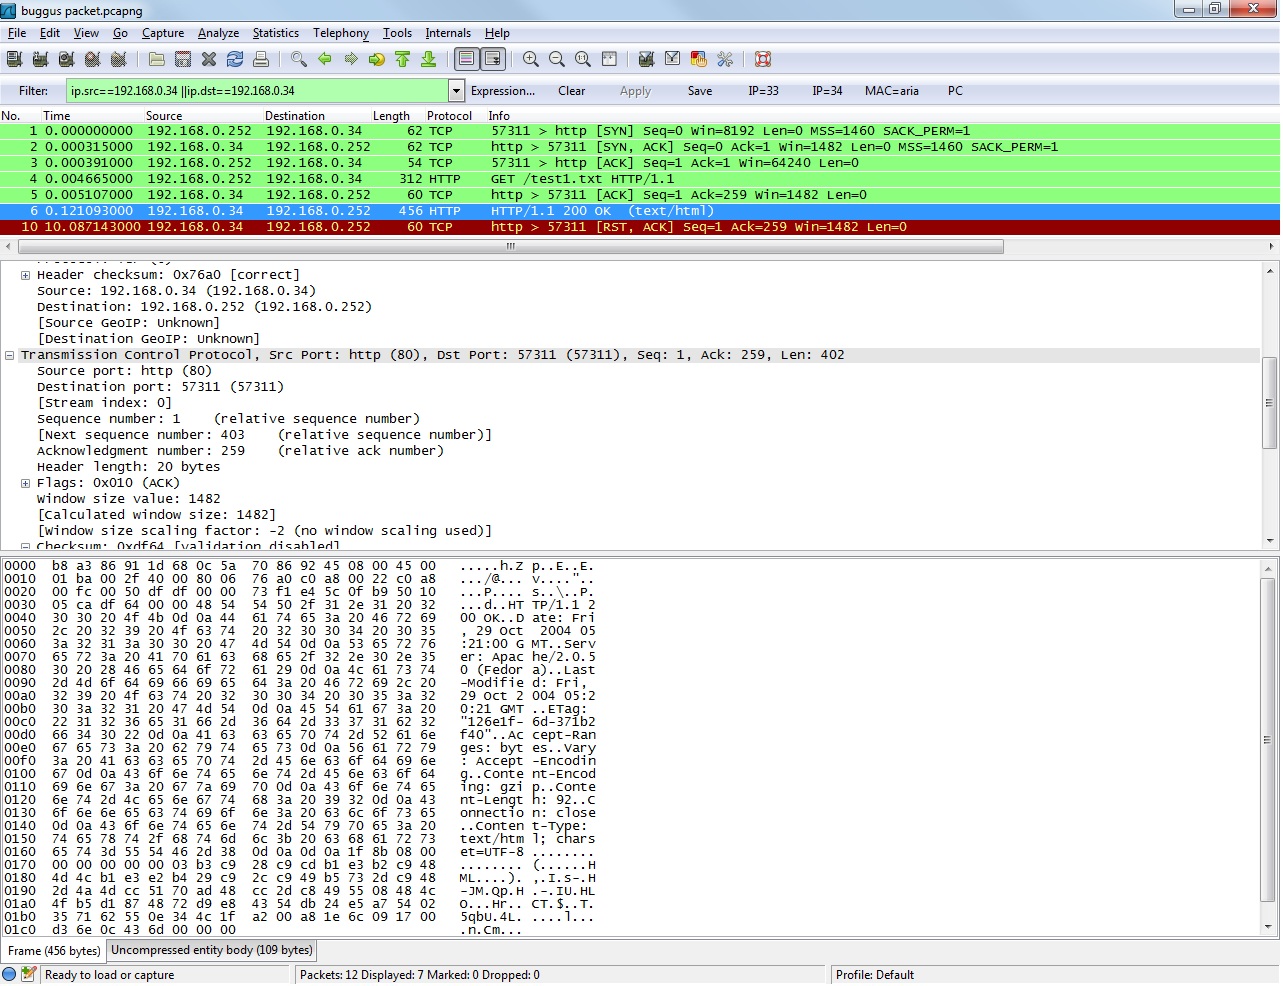 wireshark http and tcp